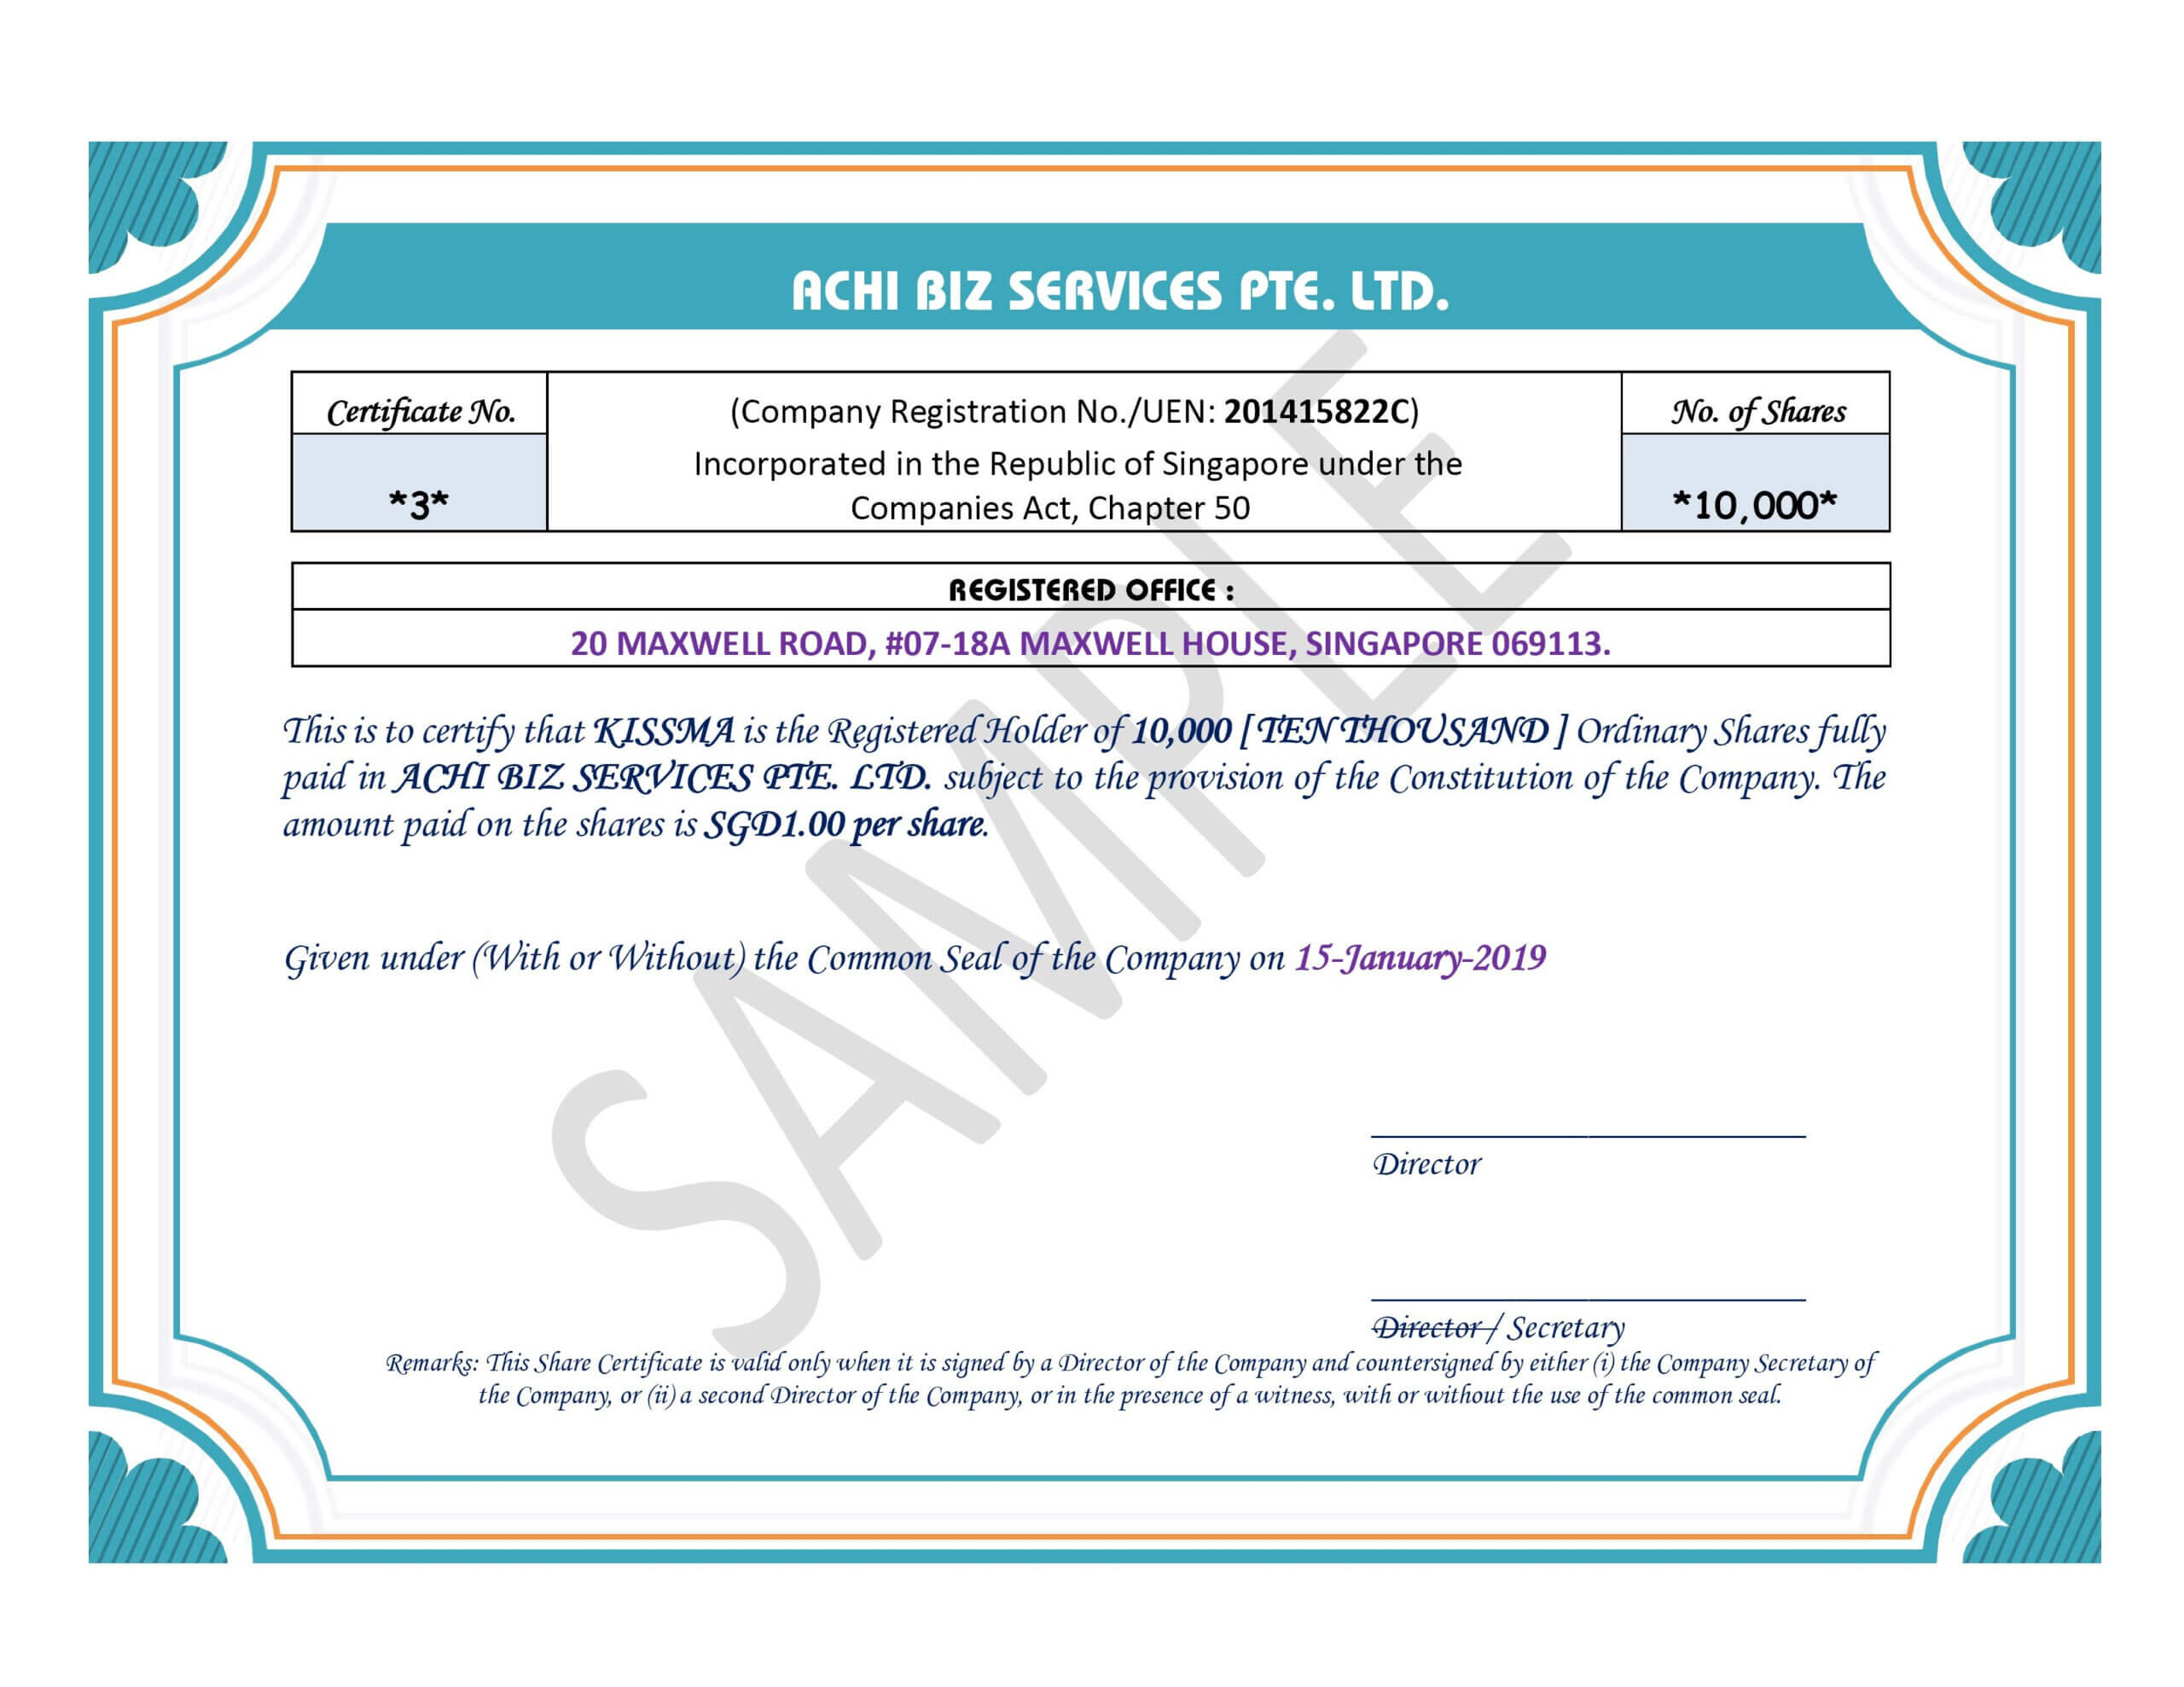 Certificate Of Shares Template